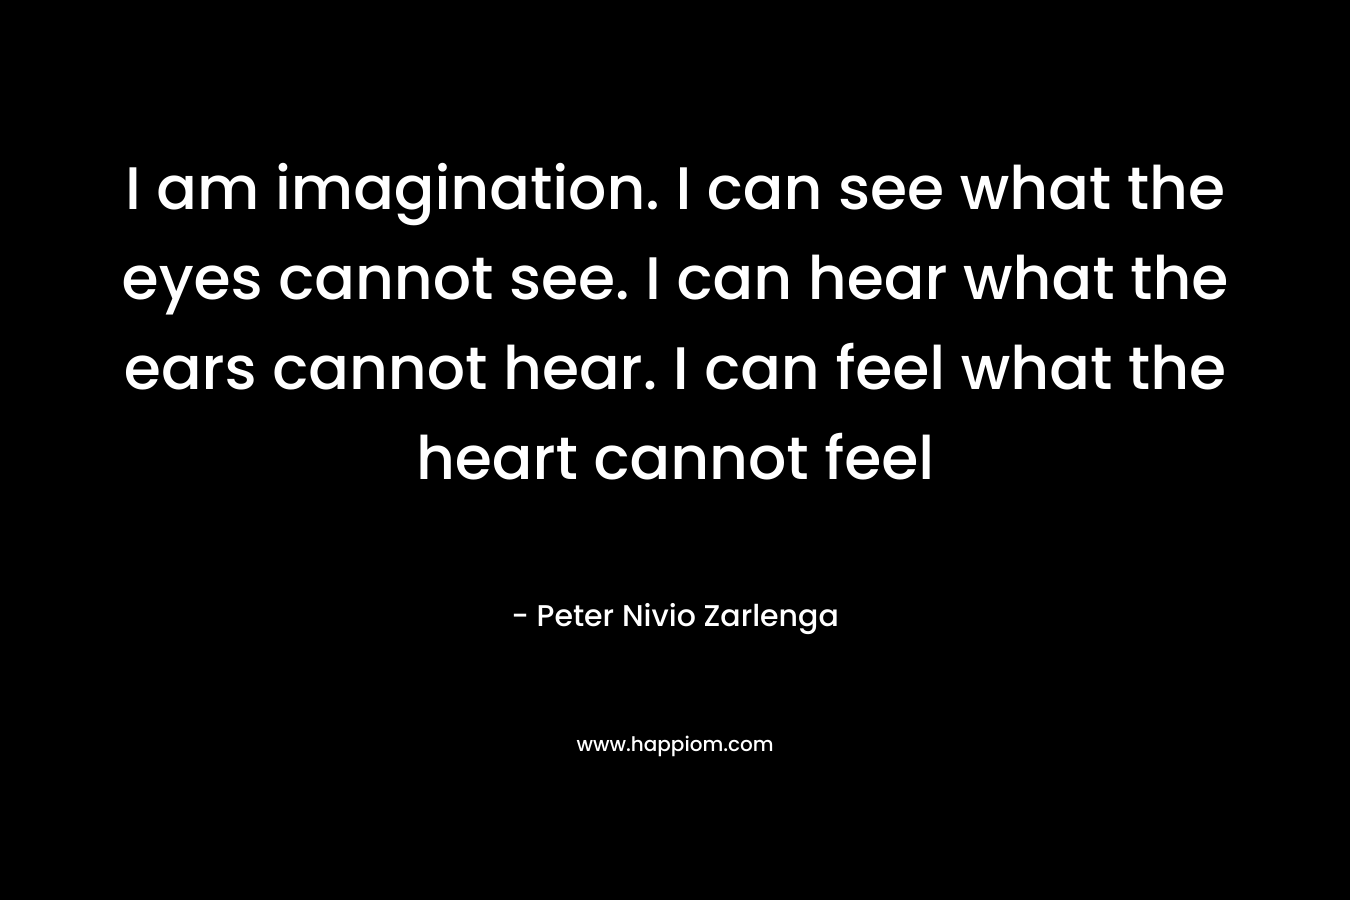 I am imagination. I can see what the eyes cannot see. I can hear what the ears cannot hear. I can feel what the heart cannot feel